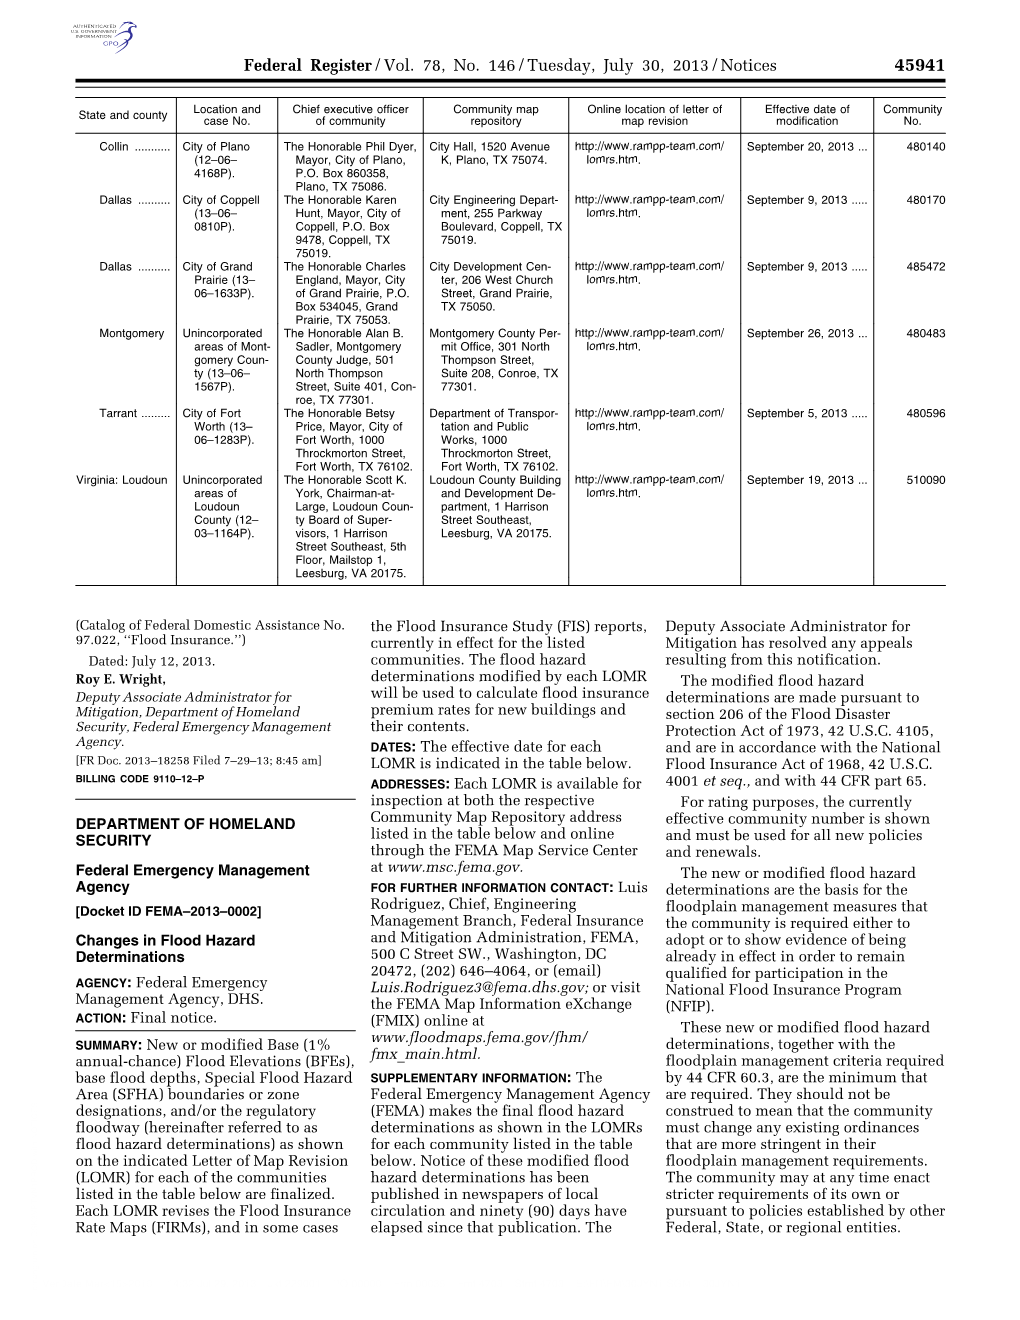 Federal Register/Vol. 78, No. 146/Tuesday, July 30, 2013/Notices